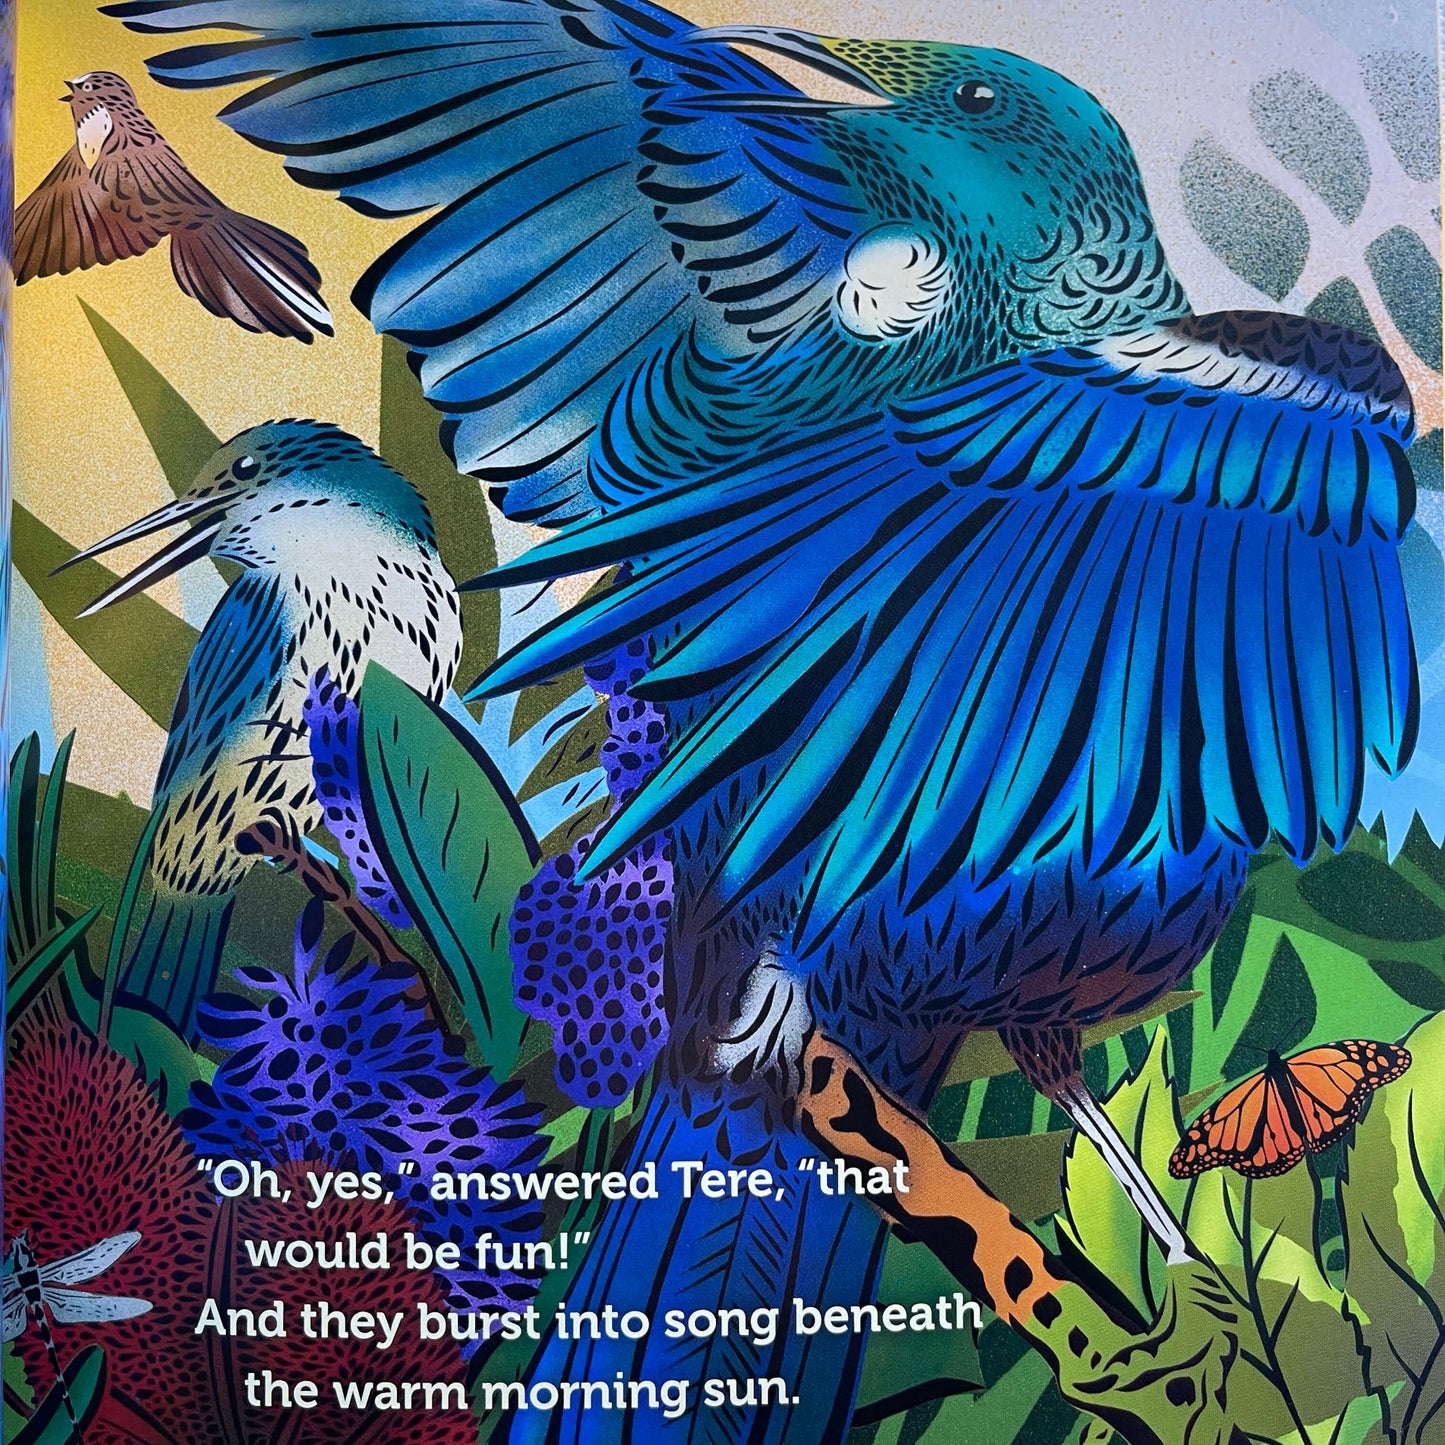 Page from Children's book Tu Meke Tui by Malcolm Clarke and illustrated by Flox.